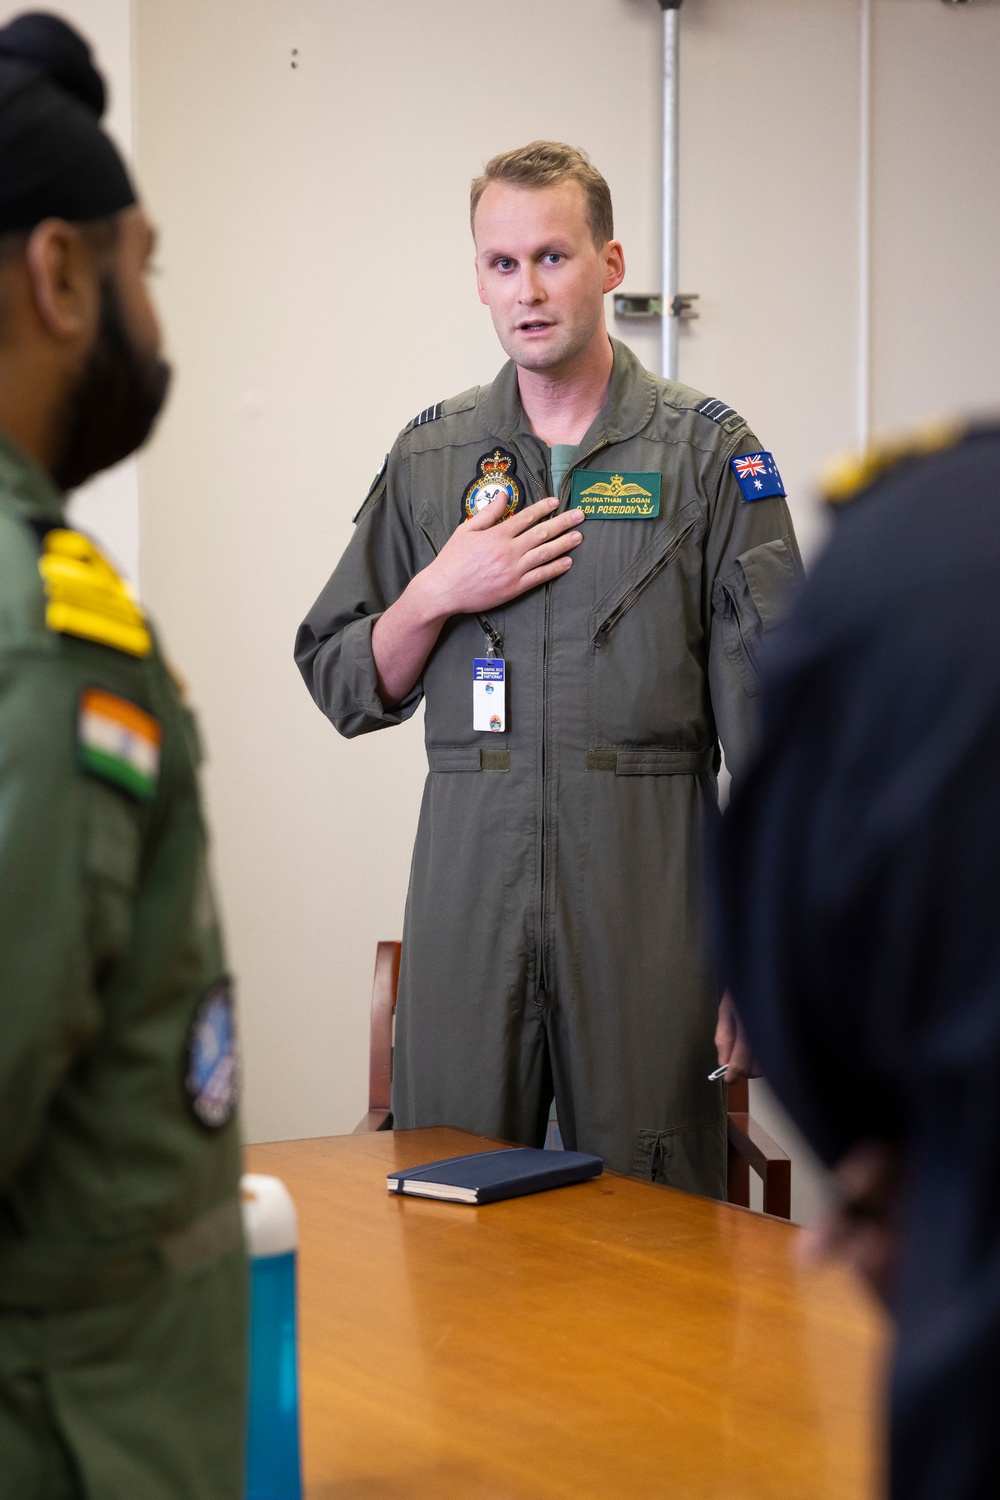 Royal Australian Air Force and Indian Navy Combined training discussion